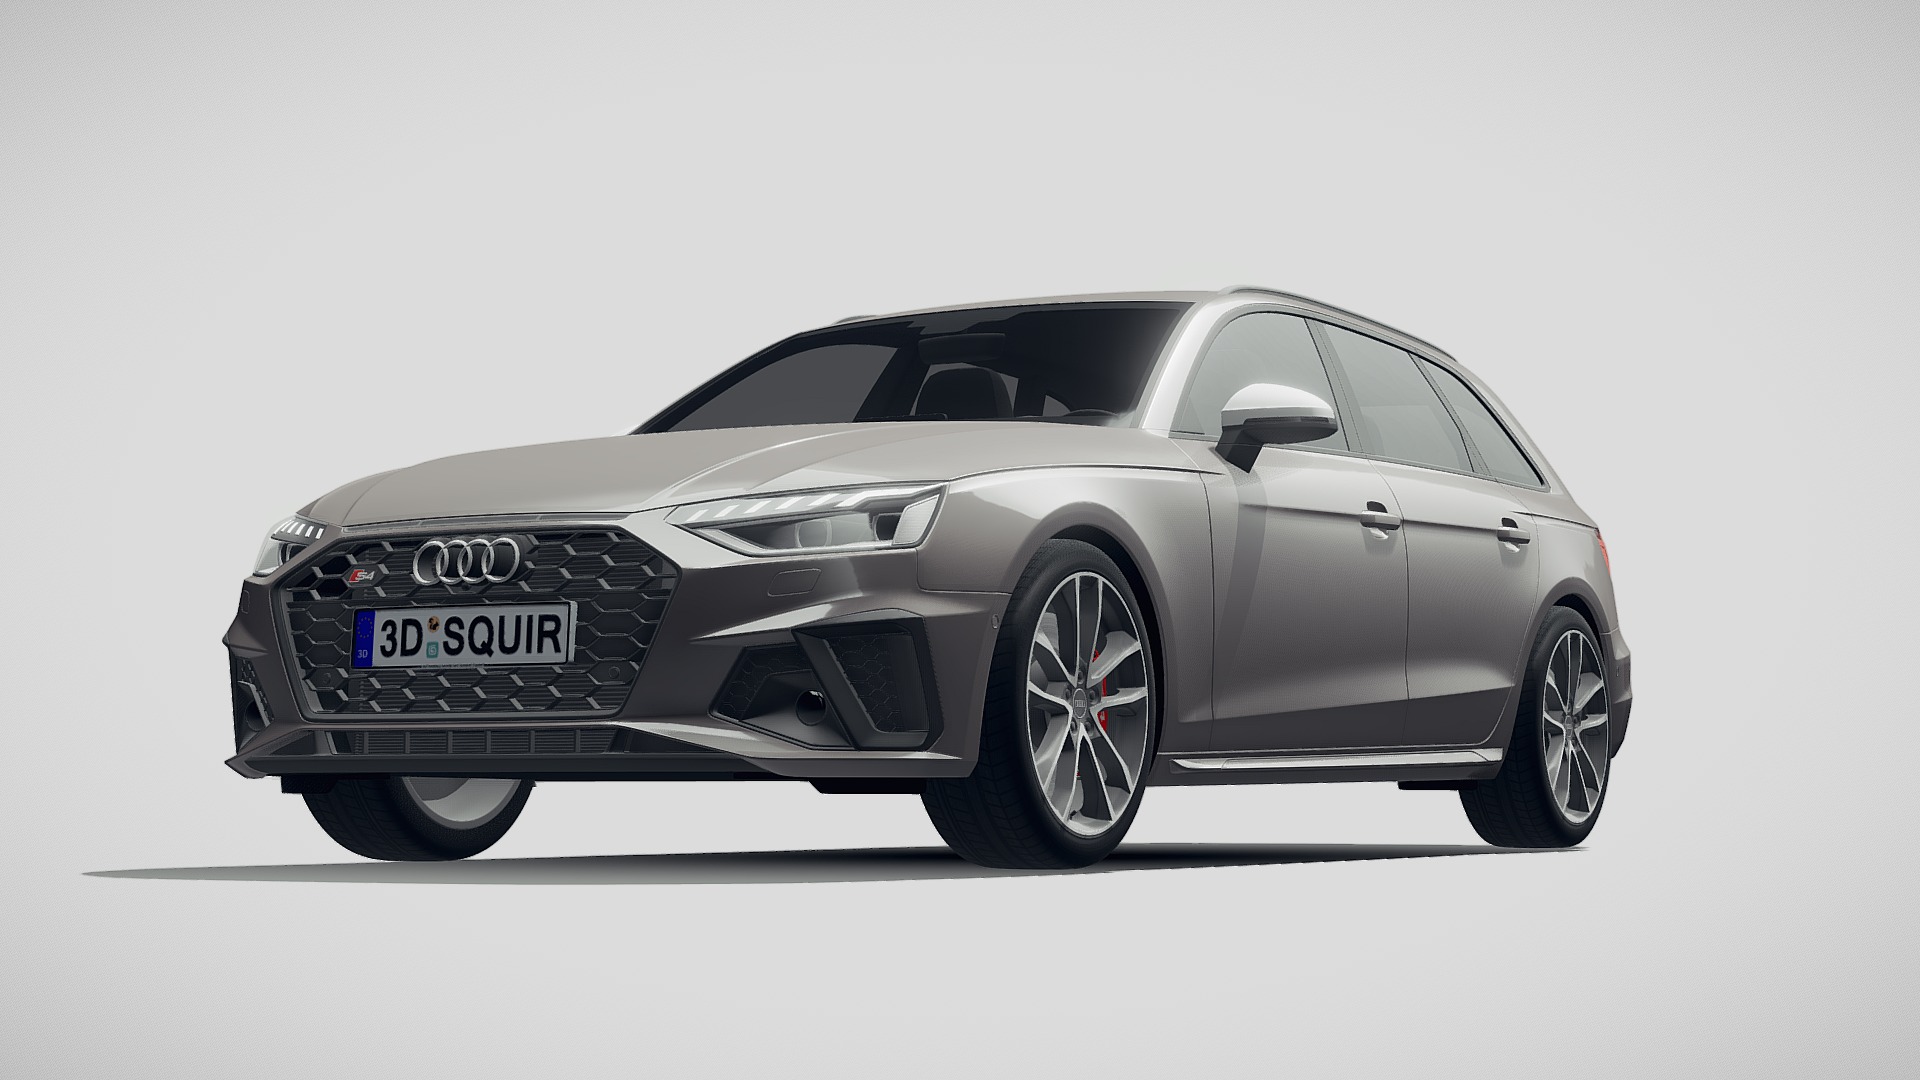 3D model Audi S4 Avant 2020 - This is a 3D model of the Audi S4 Avant 2020. The 3D model is about a silver car with a black background.